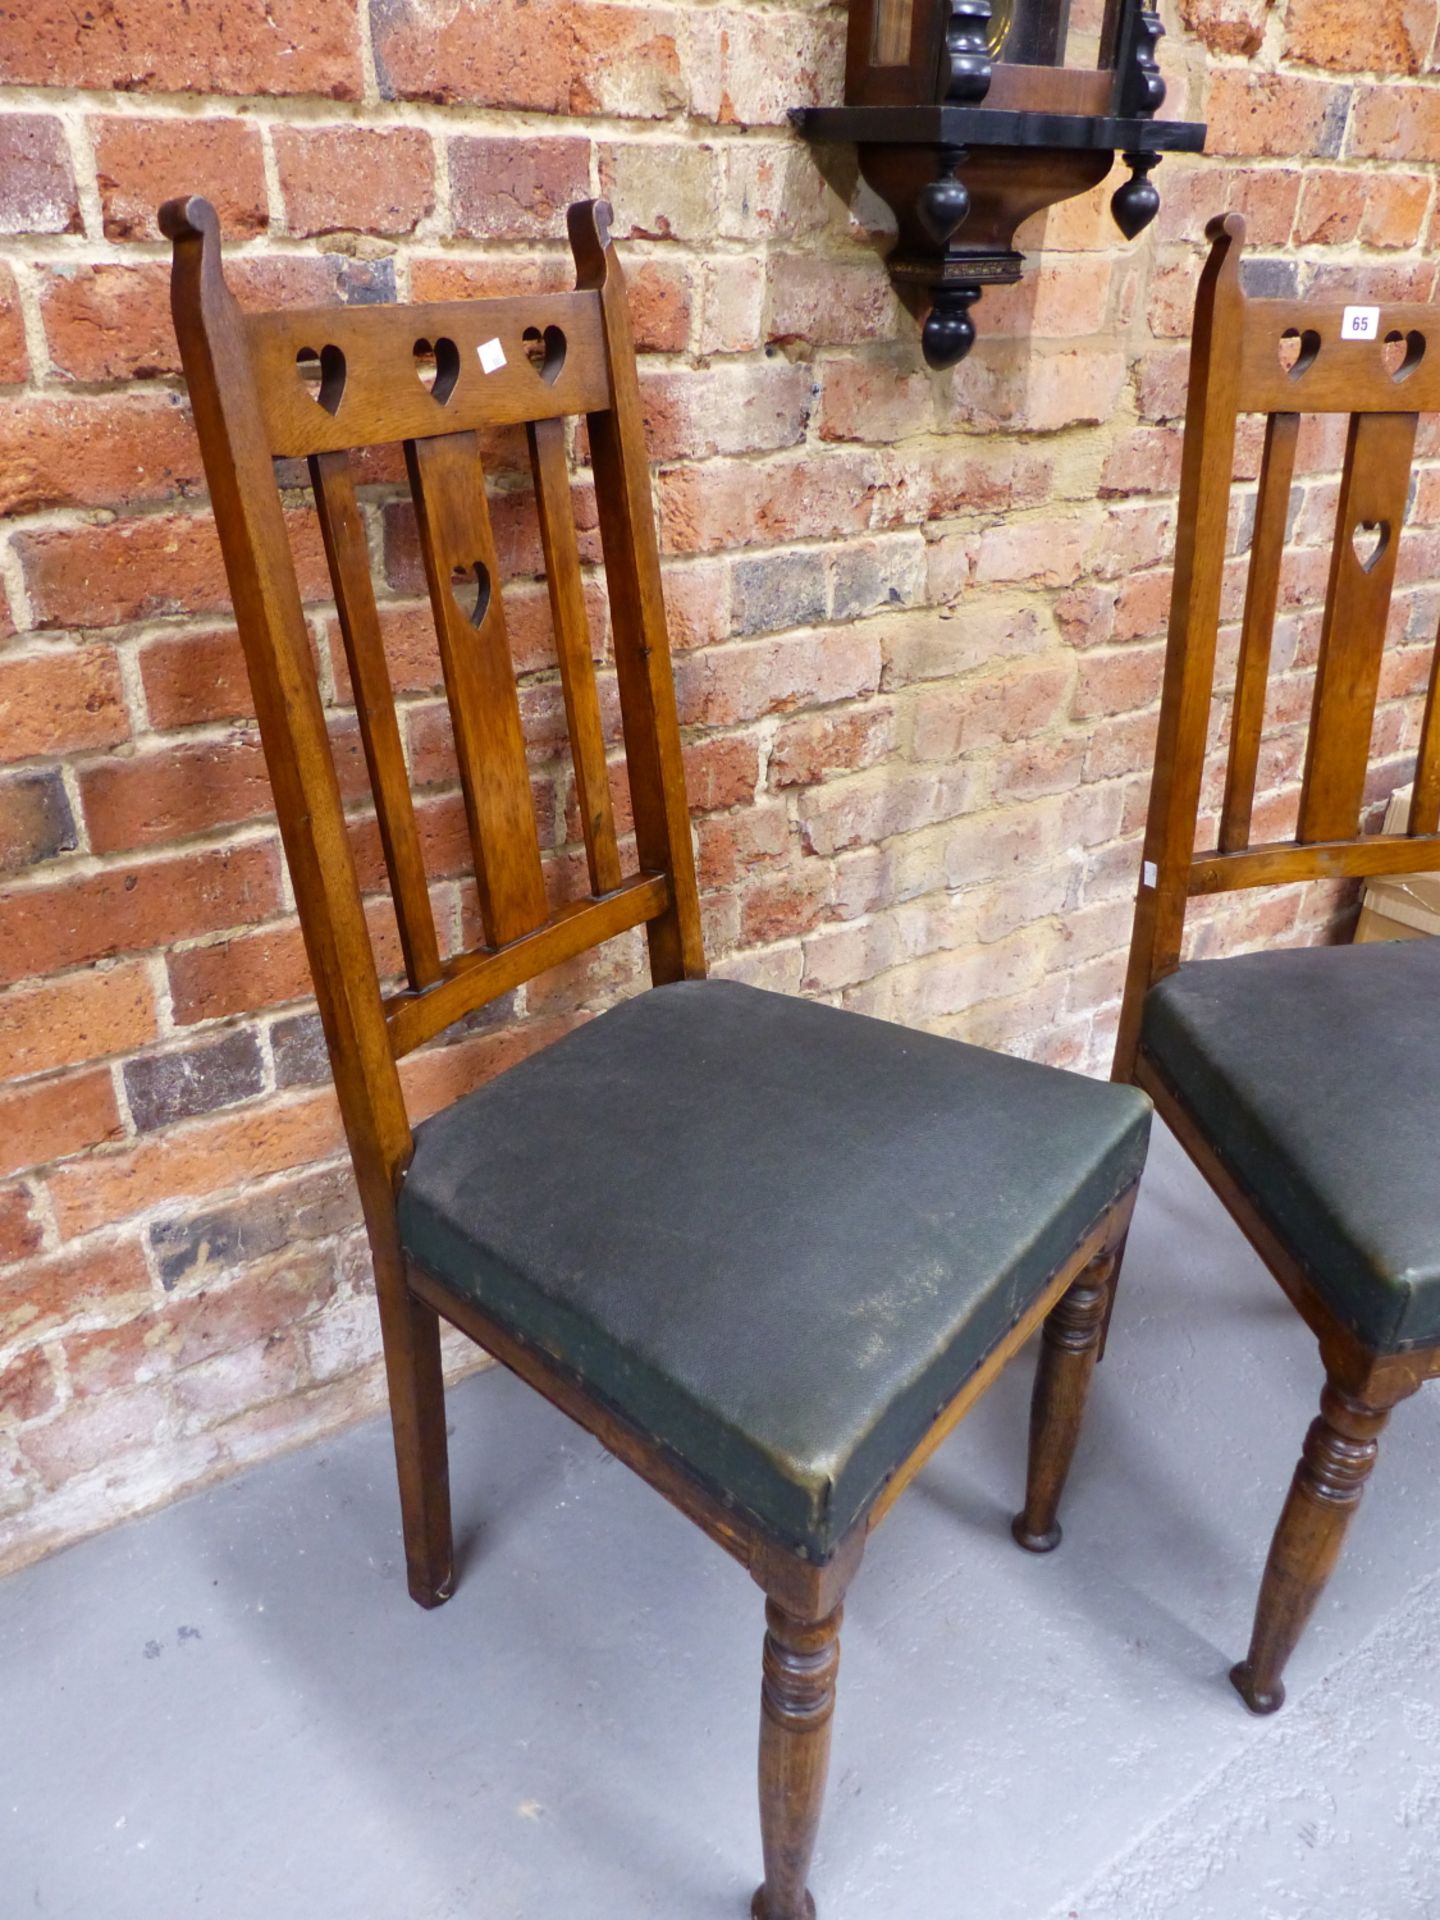 A PAIR OF EARLY 20th CENTURY ARTS AND CRAFTS STYLE OAK DINING CHAIRS WITH PIERCED HEART BACKS AND - Image 4 of 4